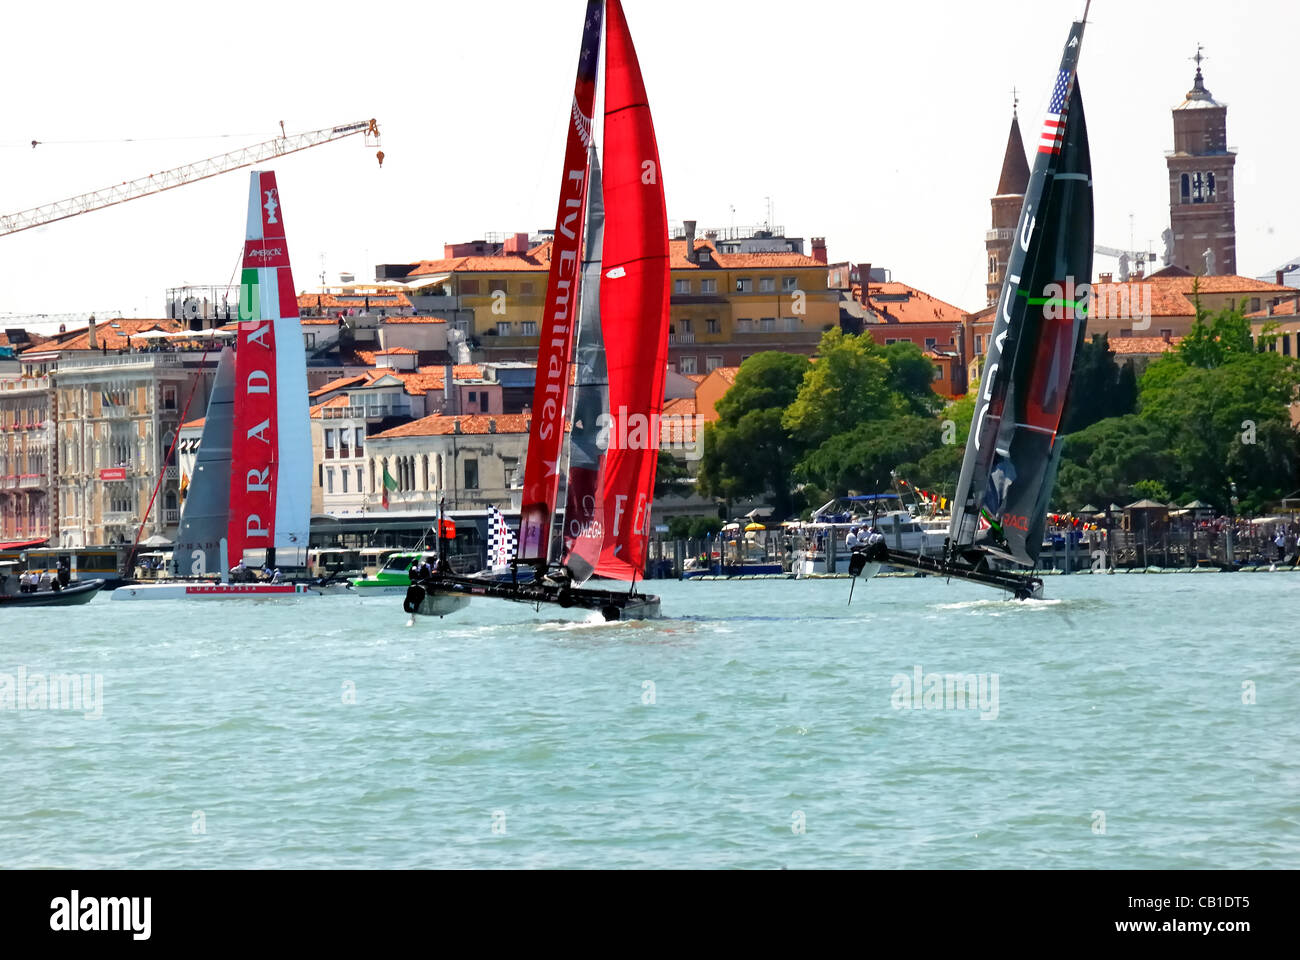 May 19, 2012 : Venice America's Cup. Luna Rossa Swordfish, Emirates and Oracle. Stock Photo